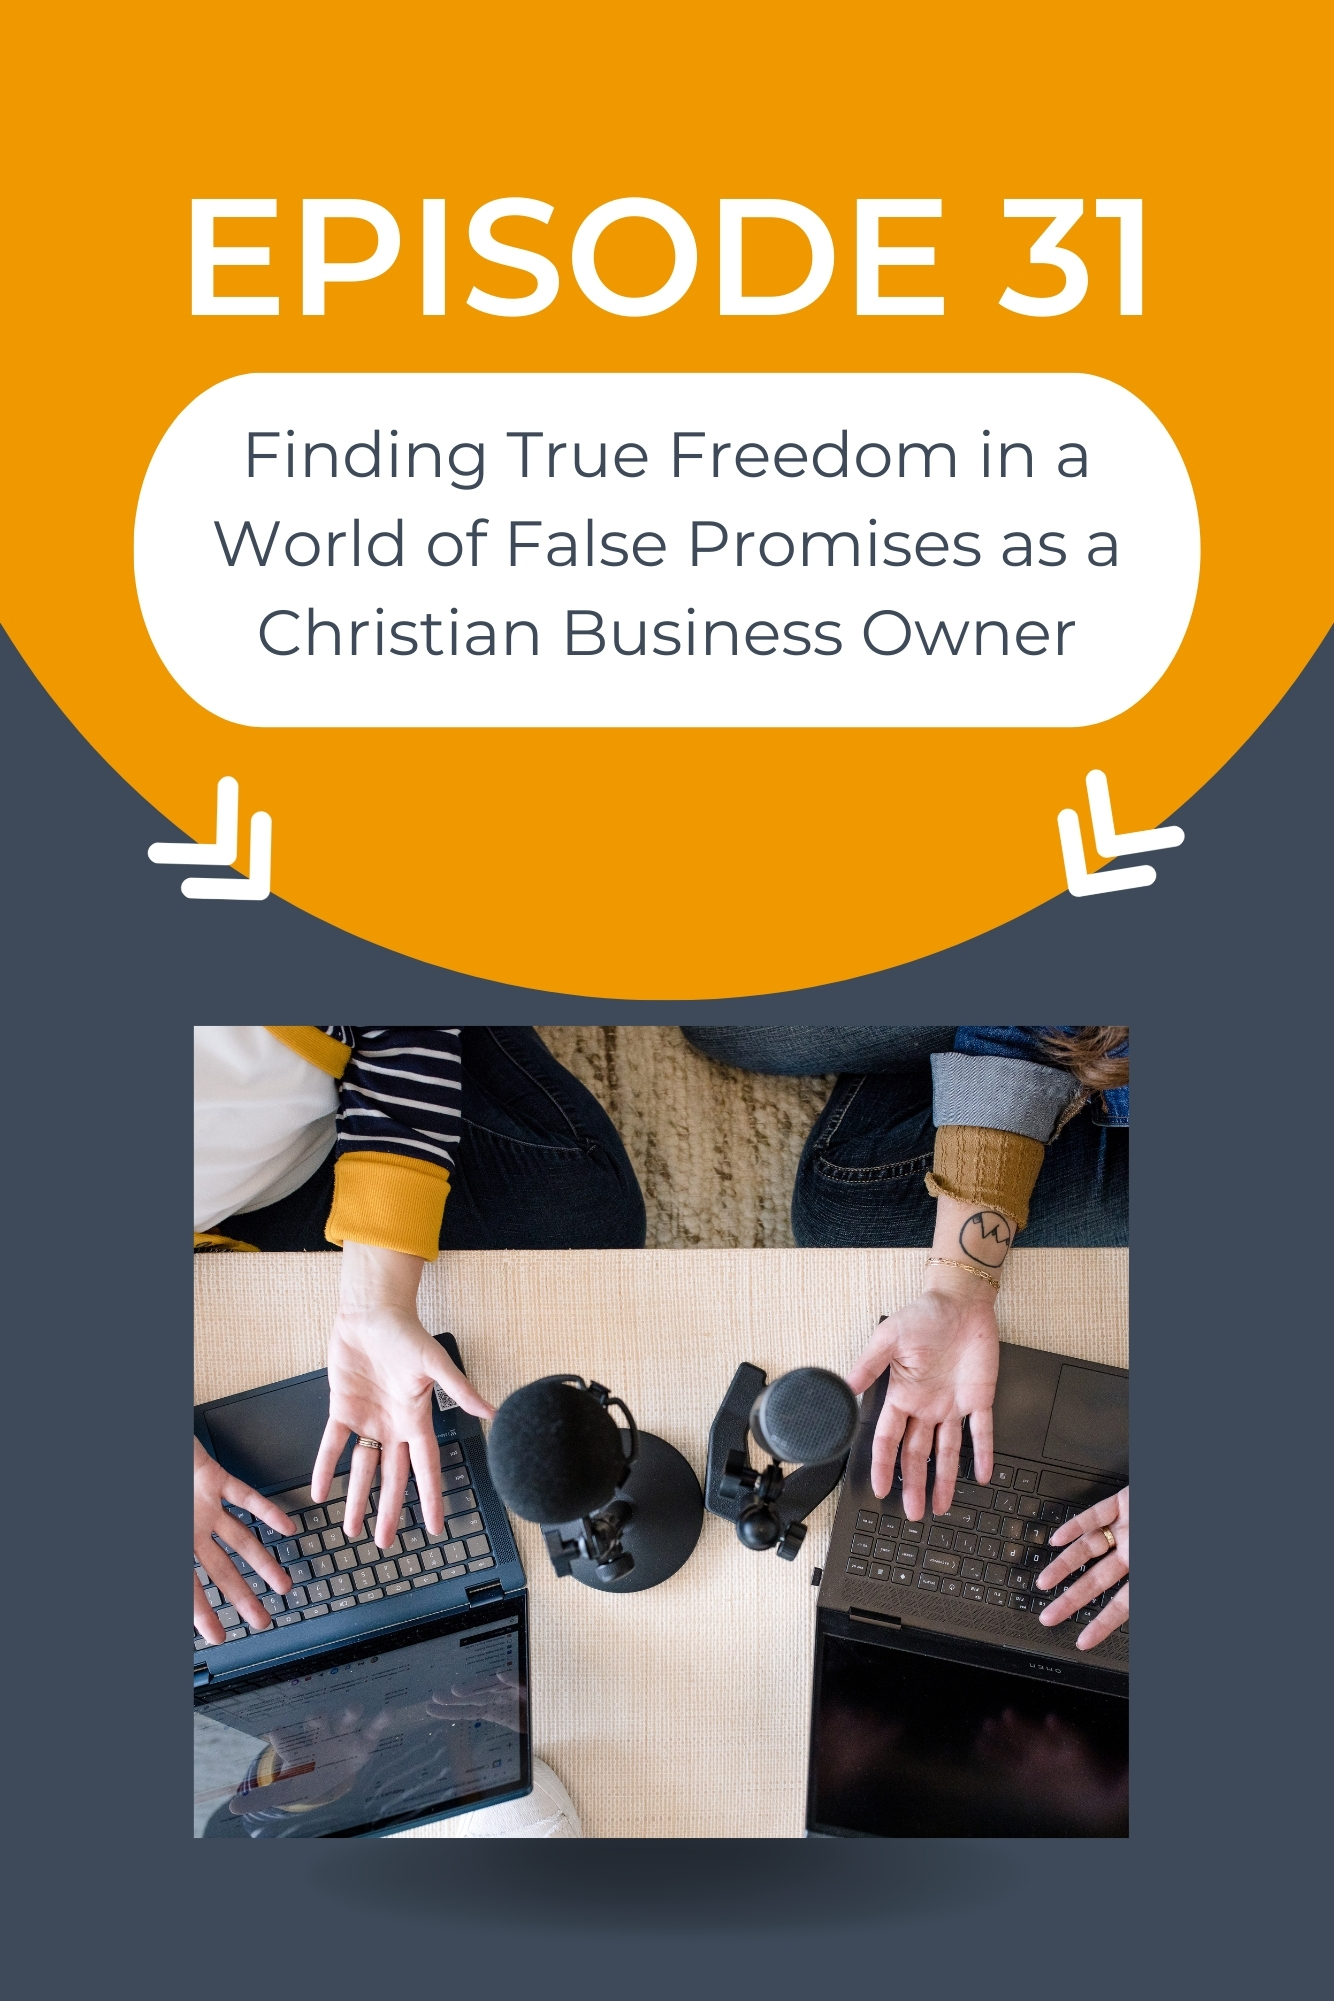 A graphic for a Christian business women podcast. It shows two women holding their hands open over their laptop computers with their podcast mics on the desk. The episode is titled Finding True Freedom in a World of False Promises